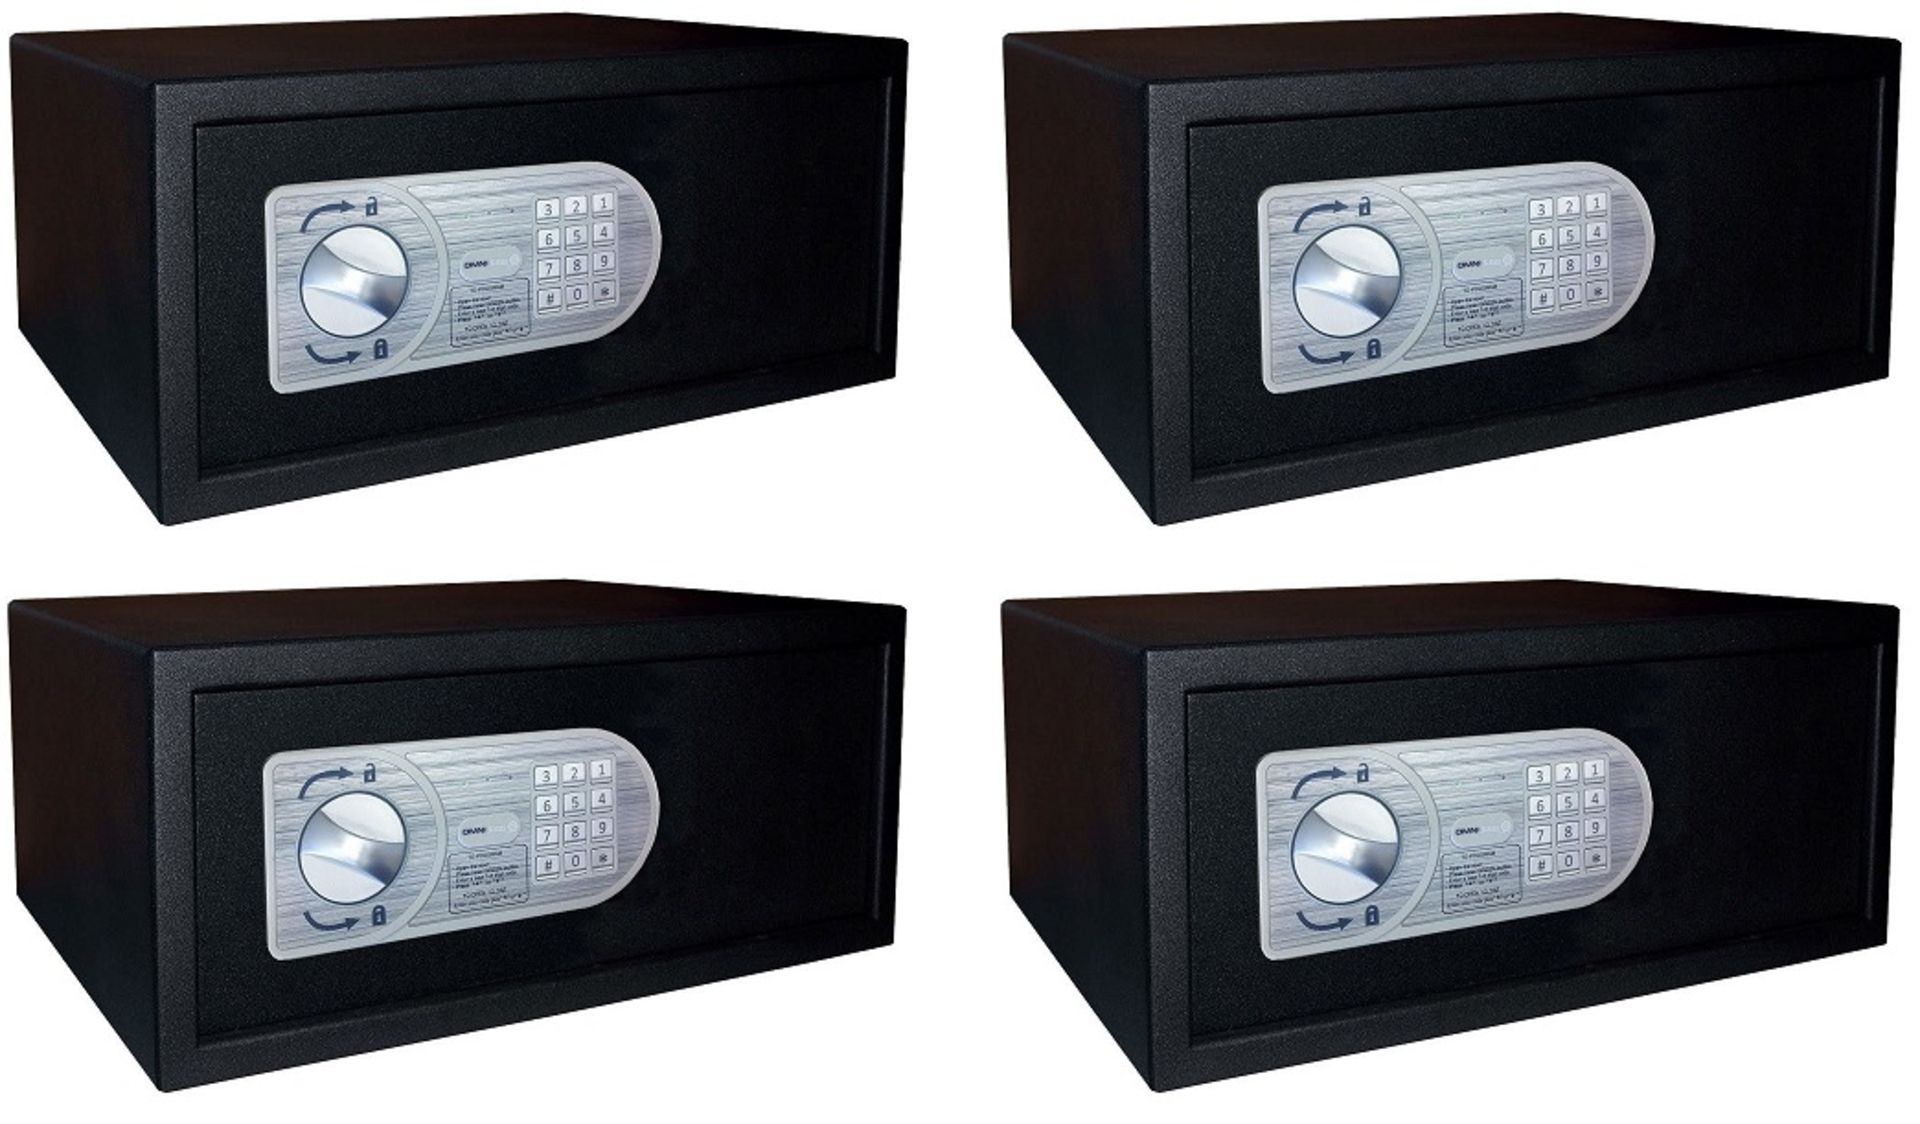 4 x Omnitec Safeguard Security Safes With Keypad Opening - Model Laptop 15 - Size H20 x W43 x D35